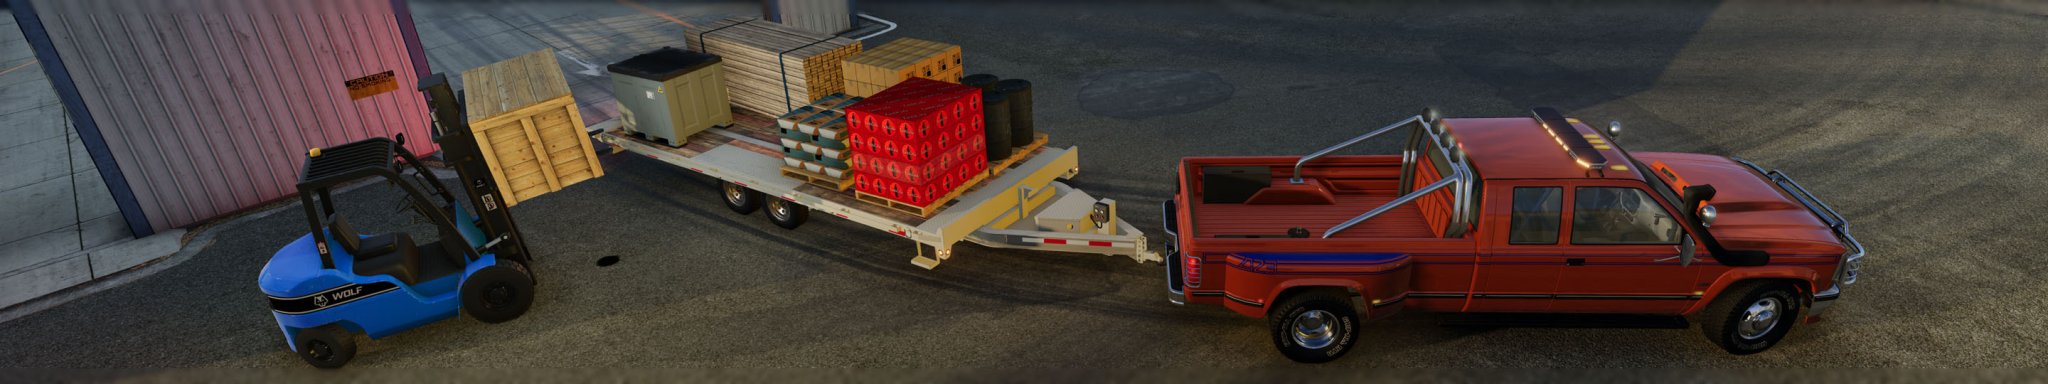 0 BeamNG WOLF FORKLIFT by TrackpadUser copy.jpg